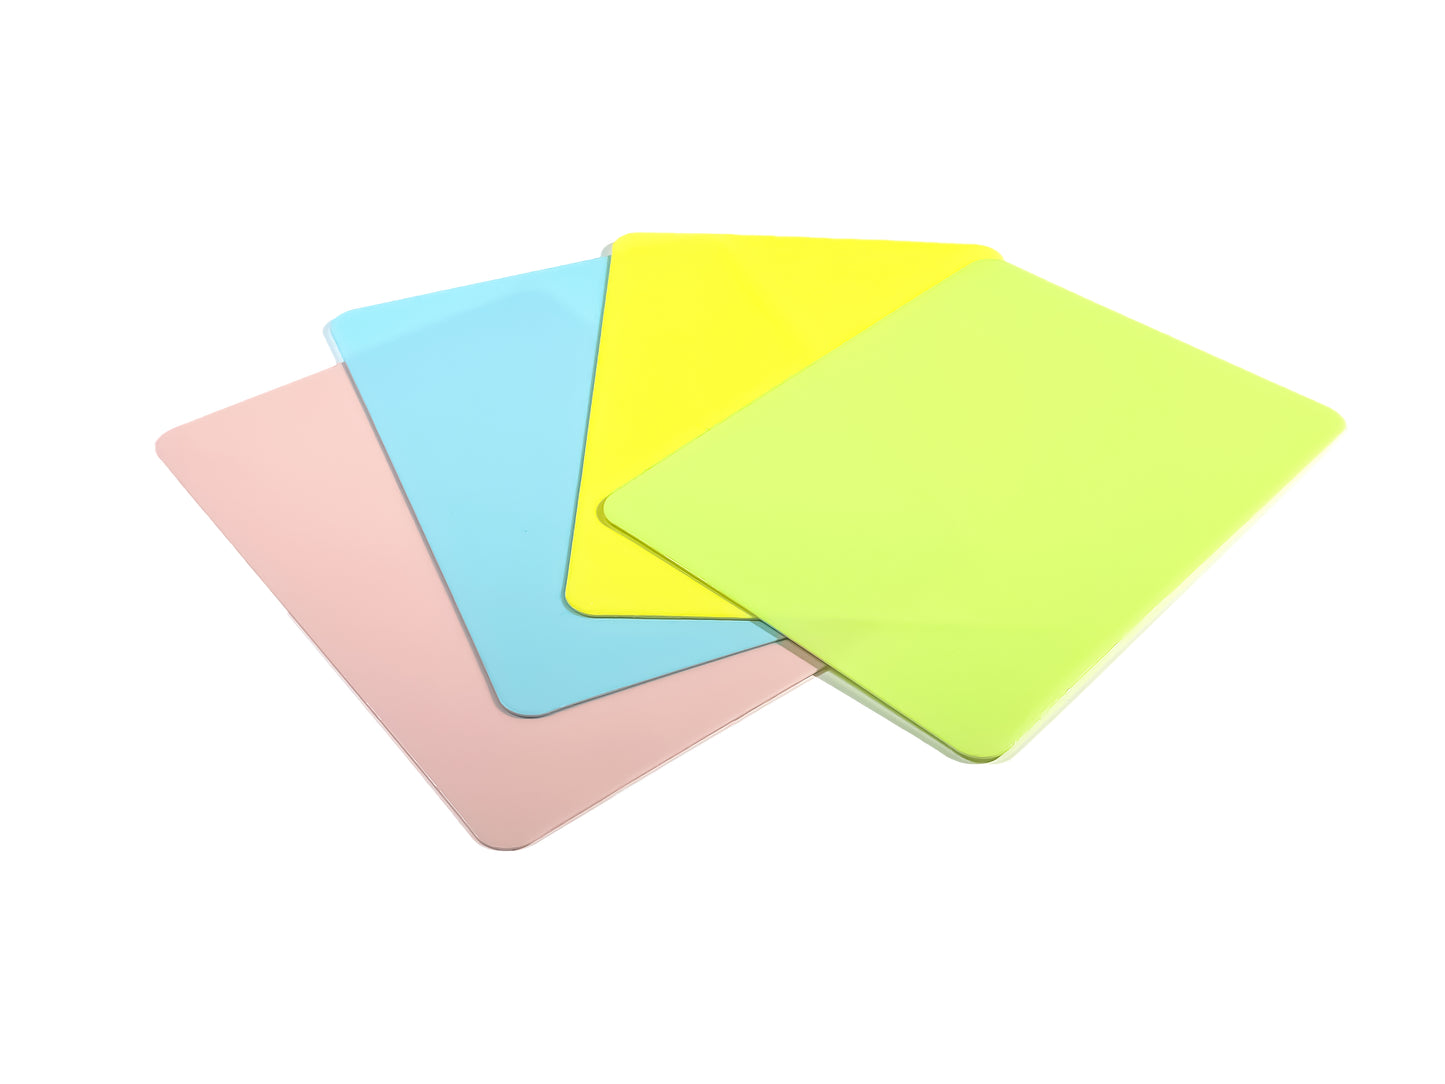 Pack of 12 A5 Assorted Coloured Whiteboards